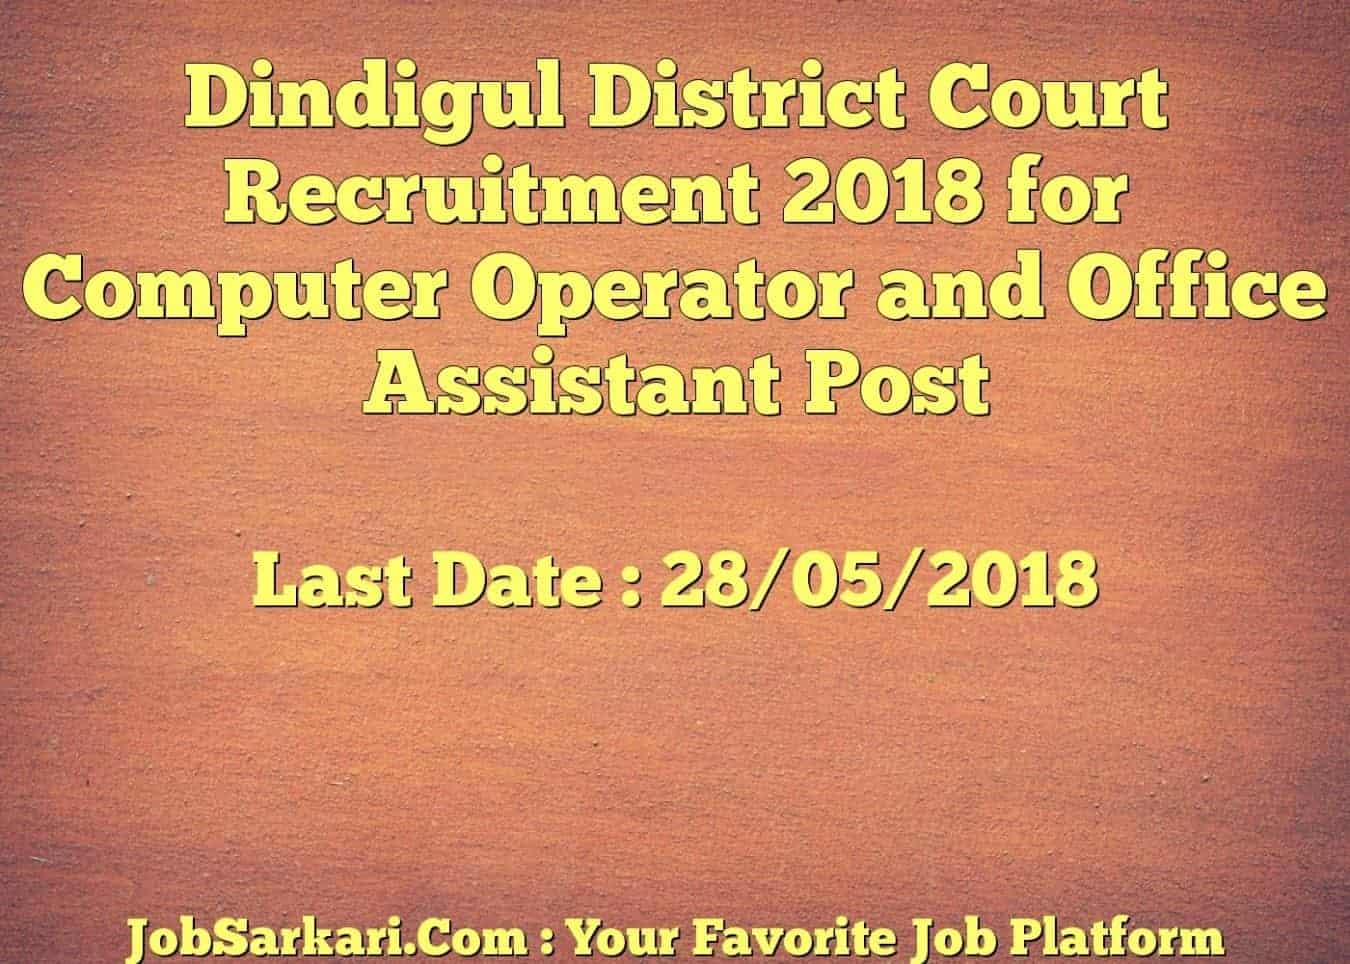 Dindigul District Court Recruitment 2018 for Computer Operator and Office Assistant Post